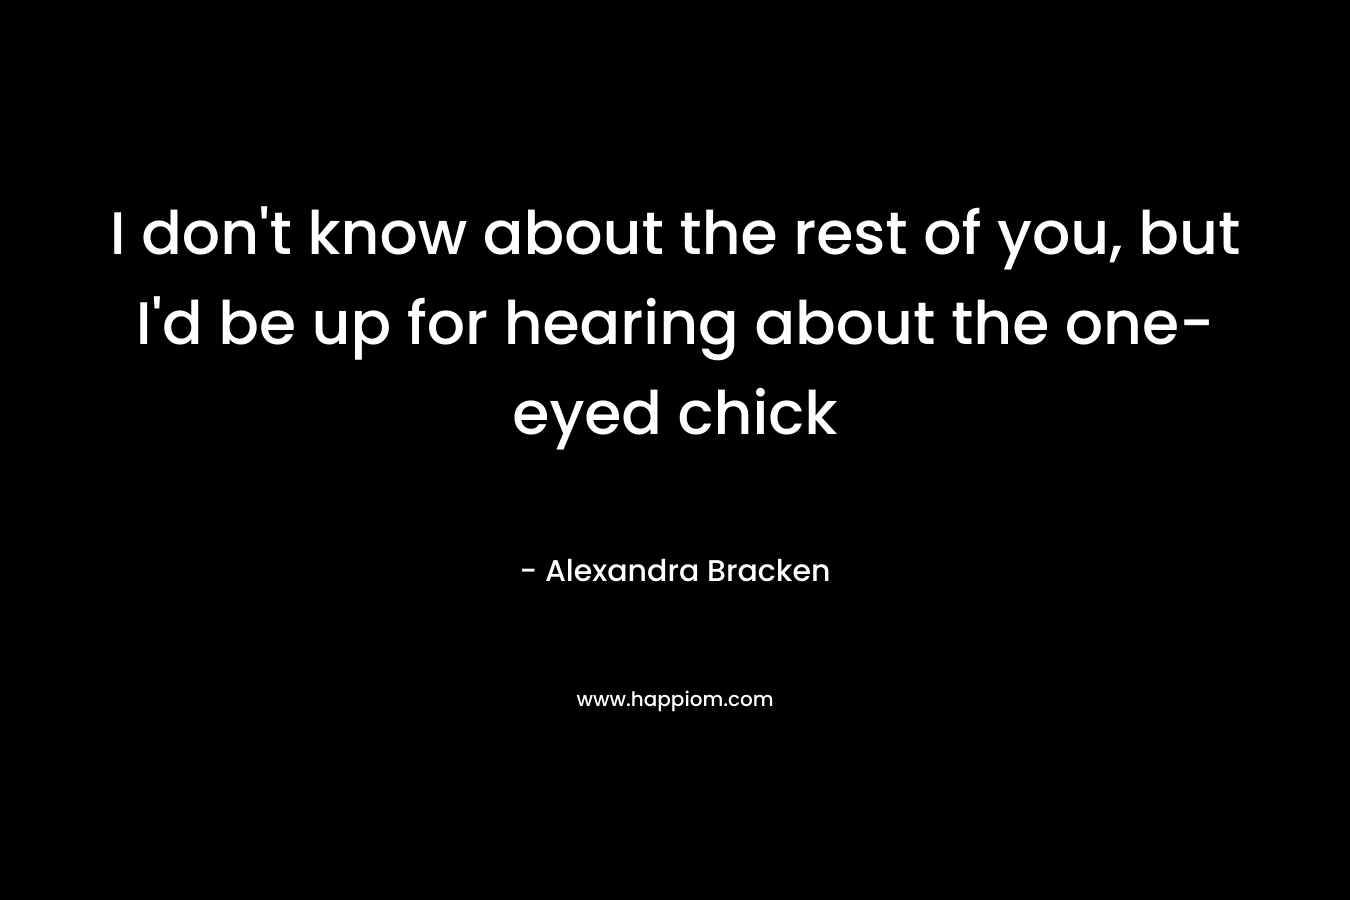 I don't know about the rest of you, but I'd be up for hearing about the one-eyed chick